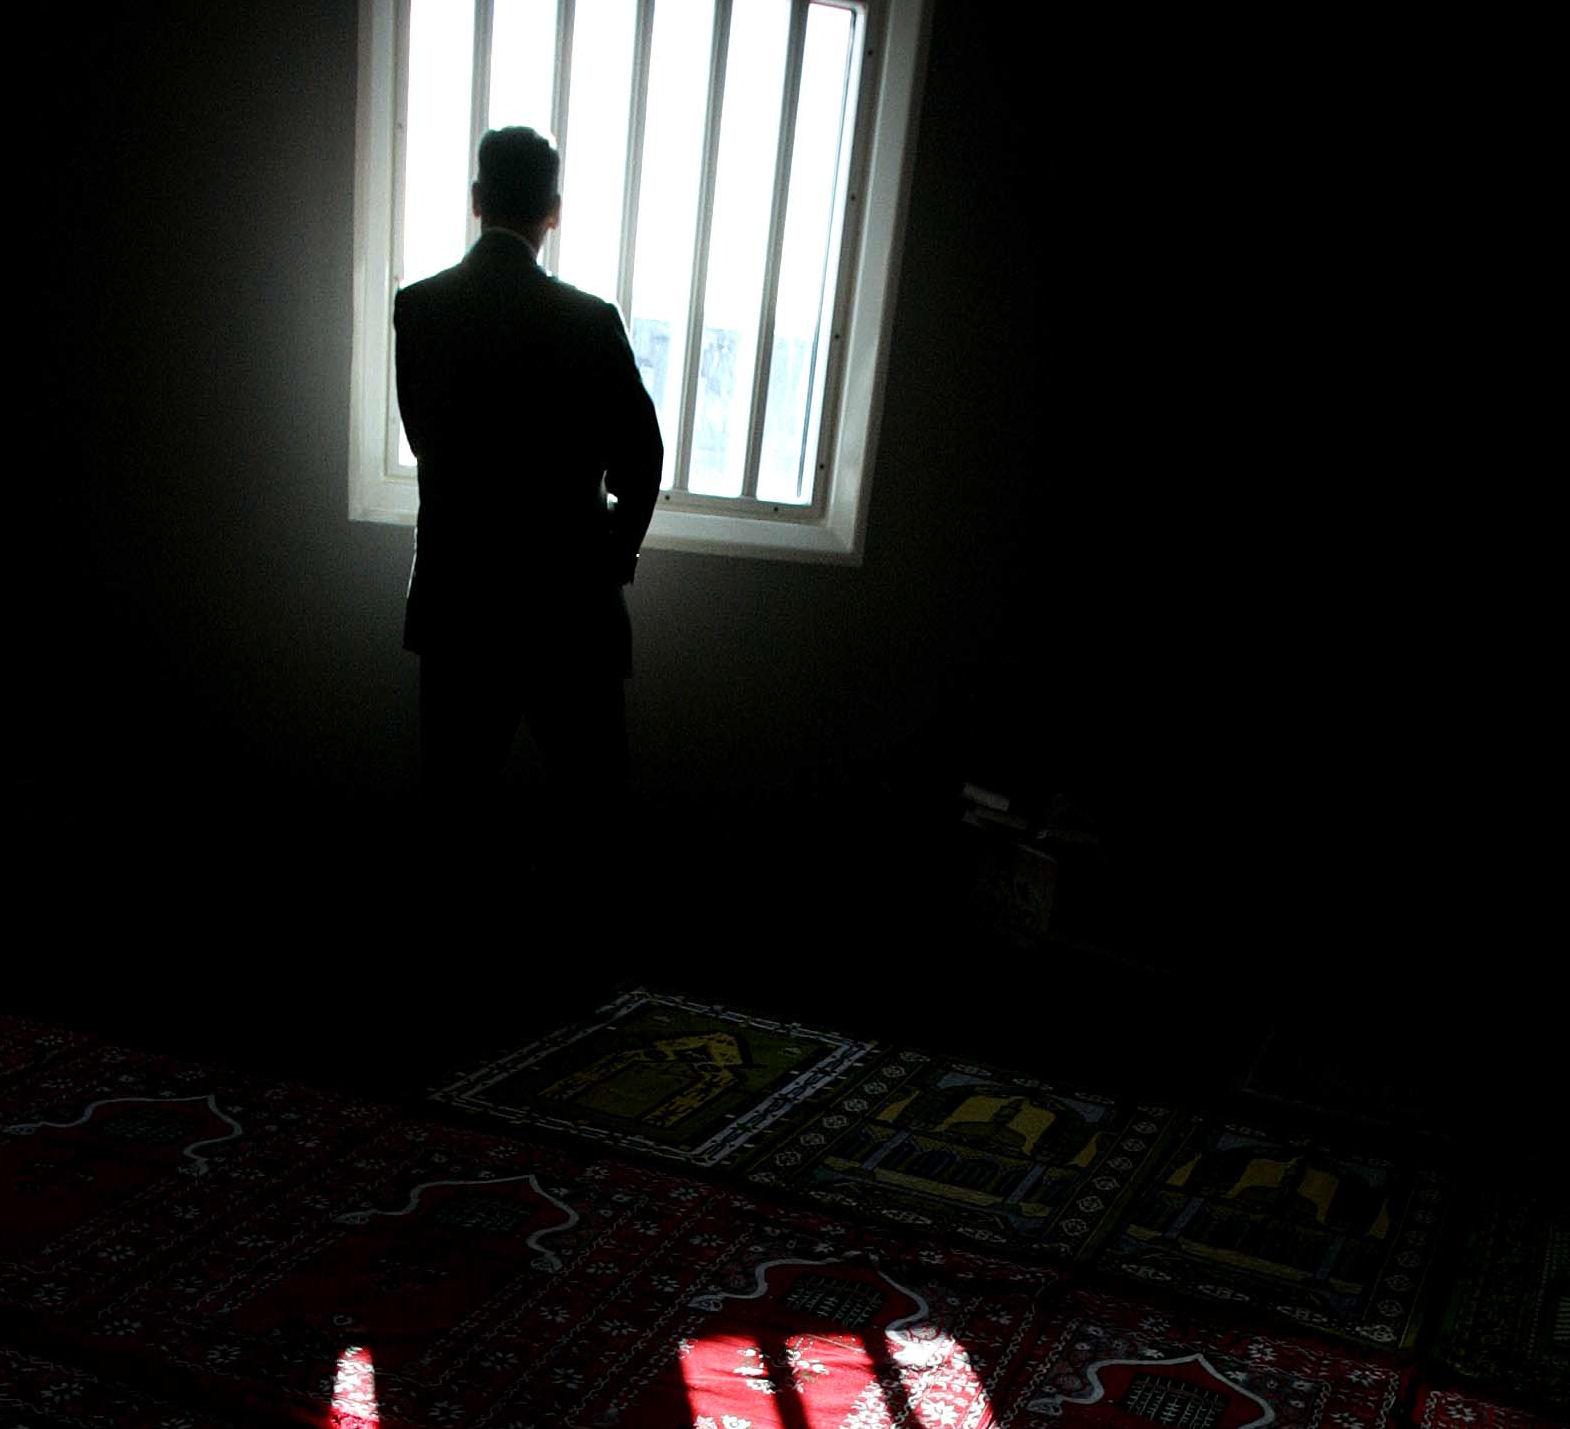 Afghan official in detention centre (credit: Getty)